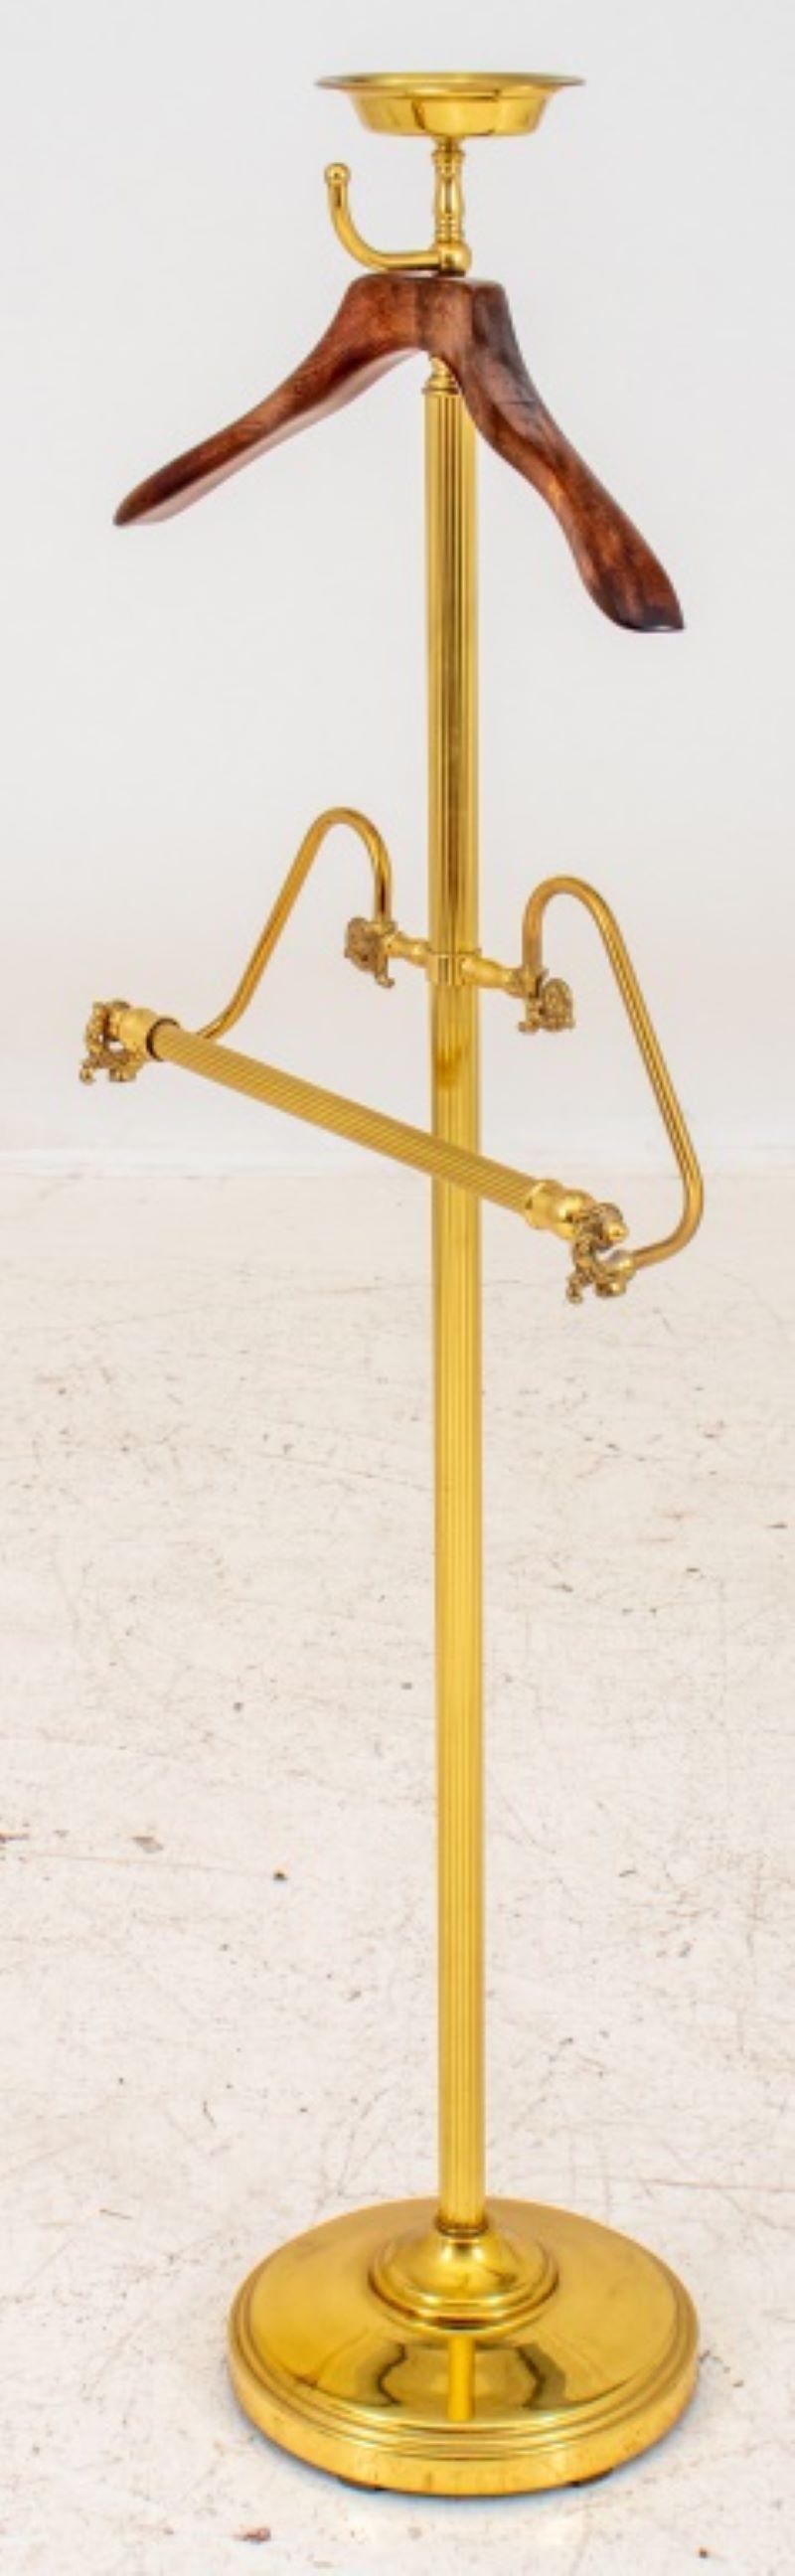 Edwardian style mens' brass Valet stand, with vide poche, tie hook, jacket hanger and trouser drape issuing from a reeded column with molded circular base. Measures: 49.5